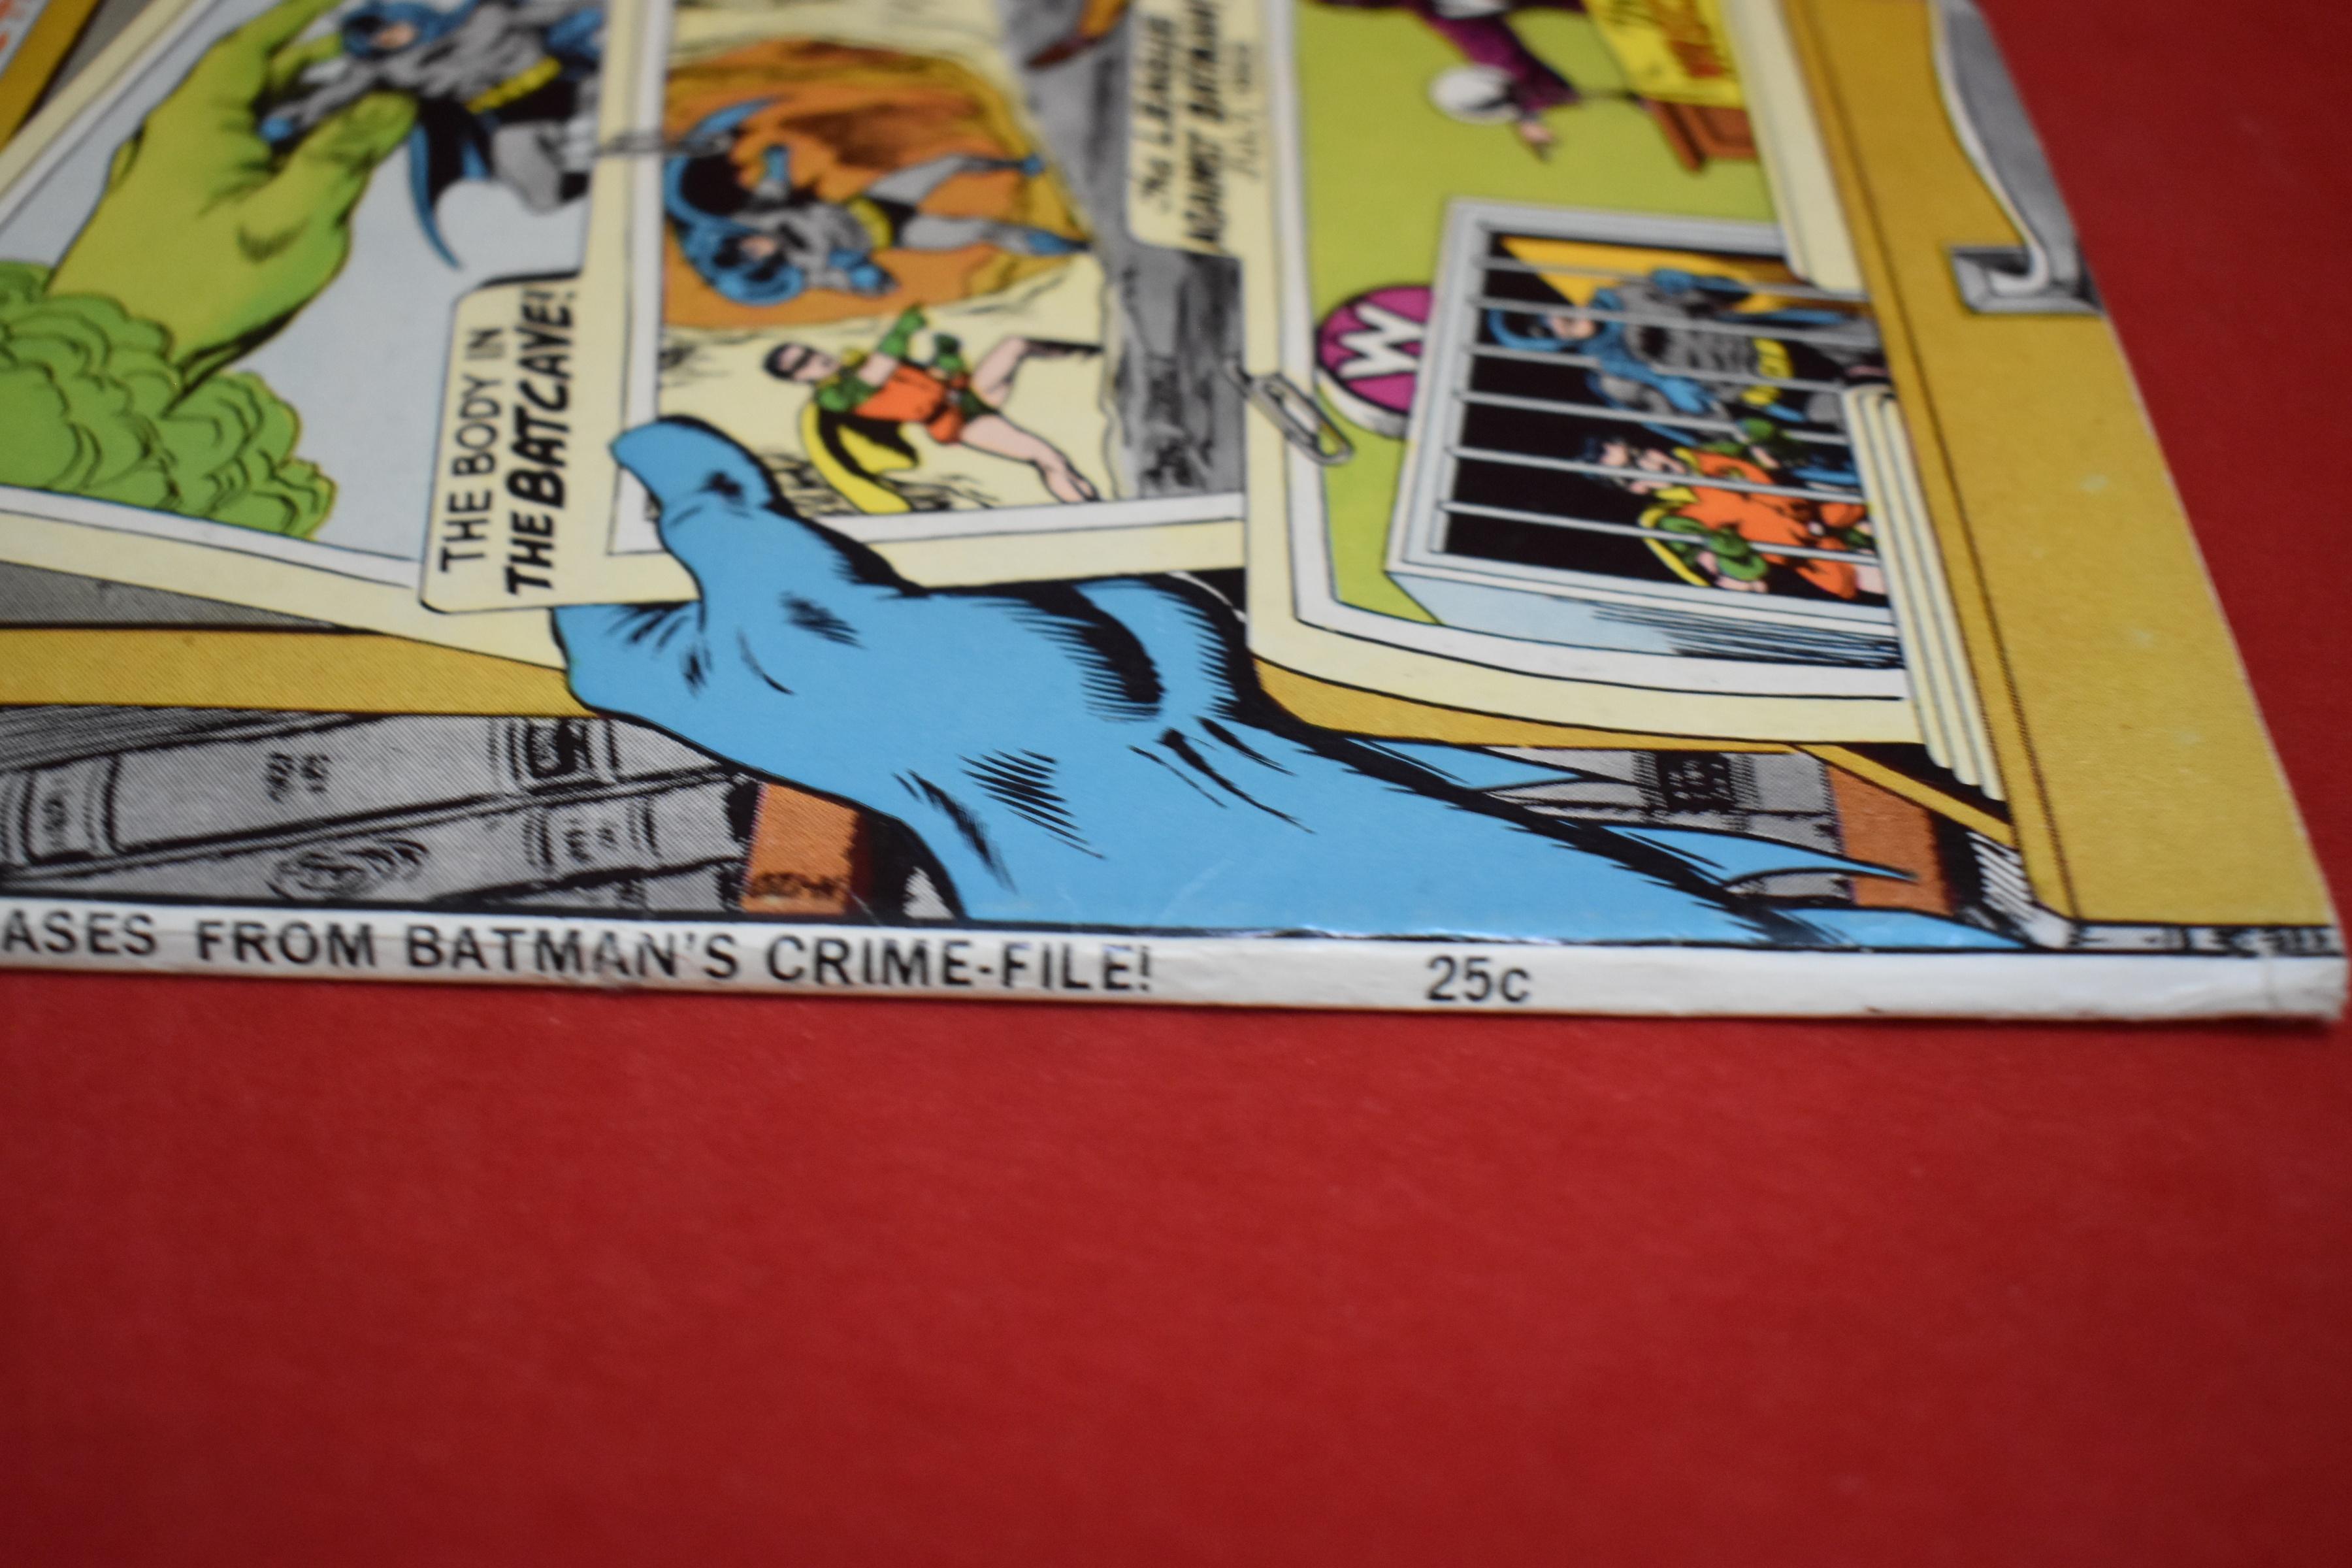 BATMAN #218 | THE BODY IN THE BATCAVE | DC GIANT - MURPHY ANDERSON - 1970 | PRETTY NICE BOOK!